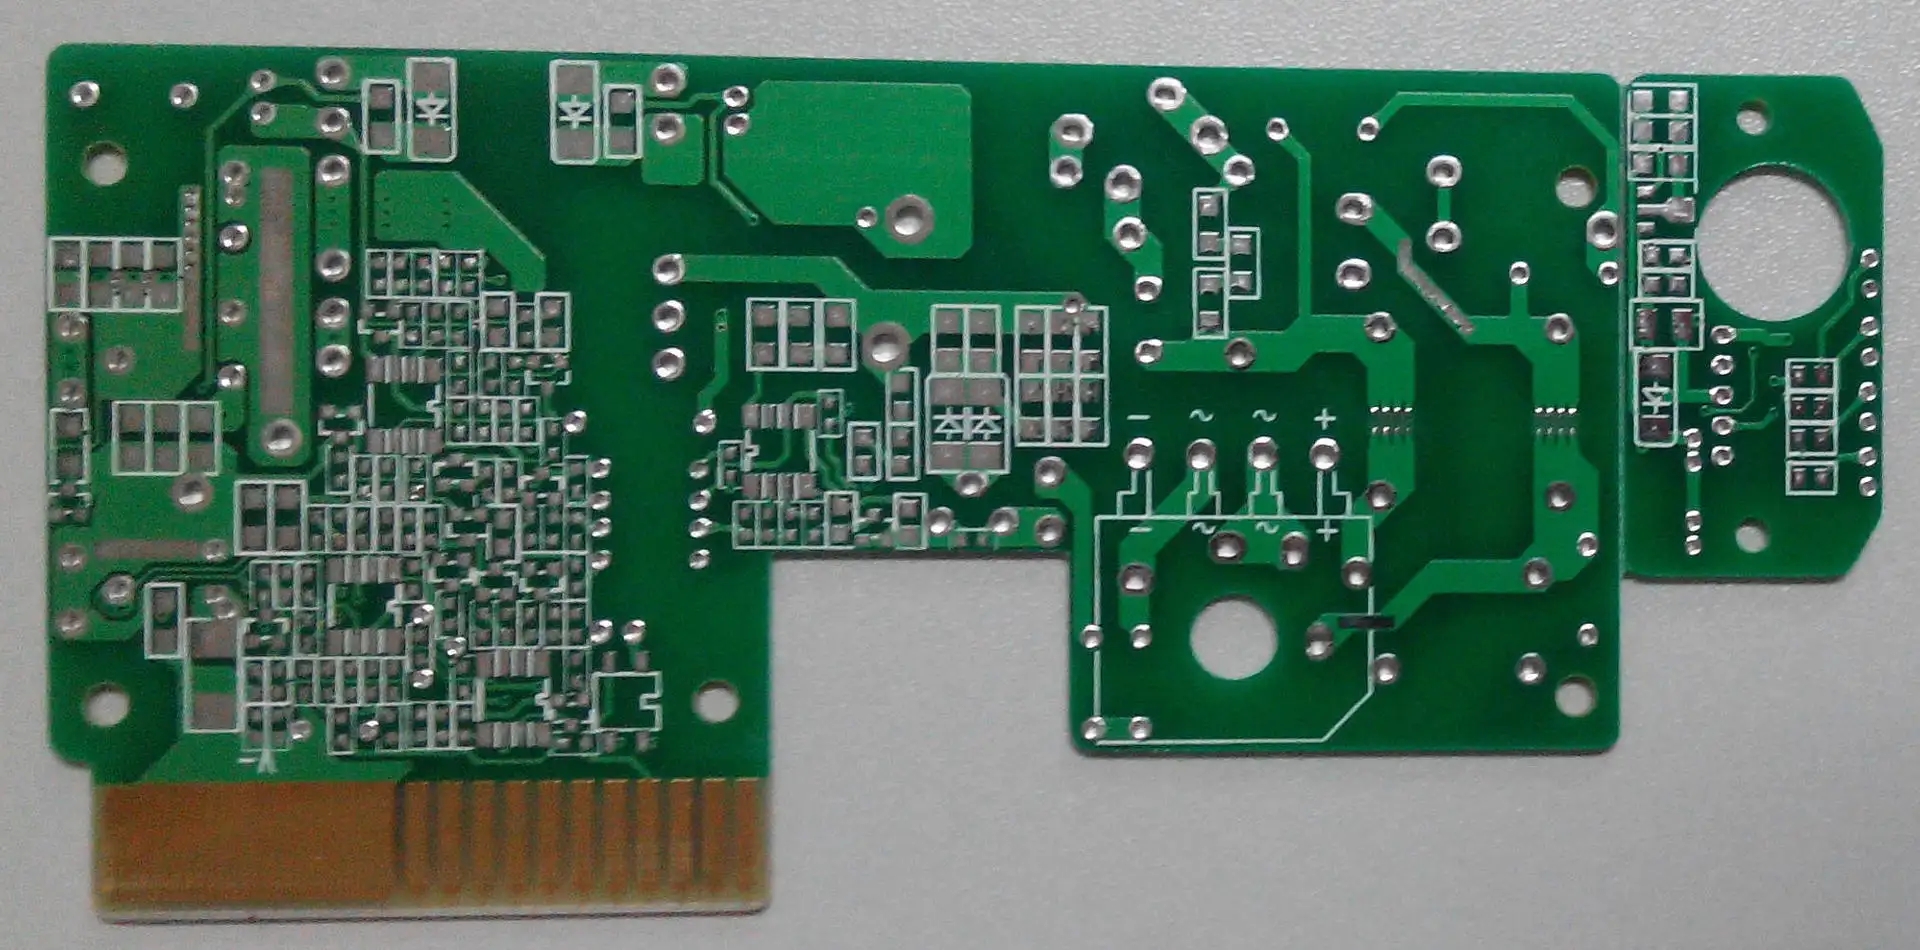 Characteristics of PCB surface gold deposition process and placement of capacitors